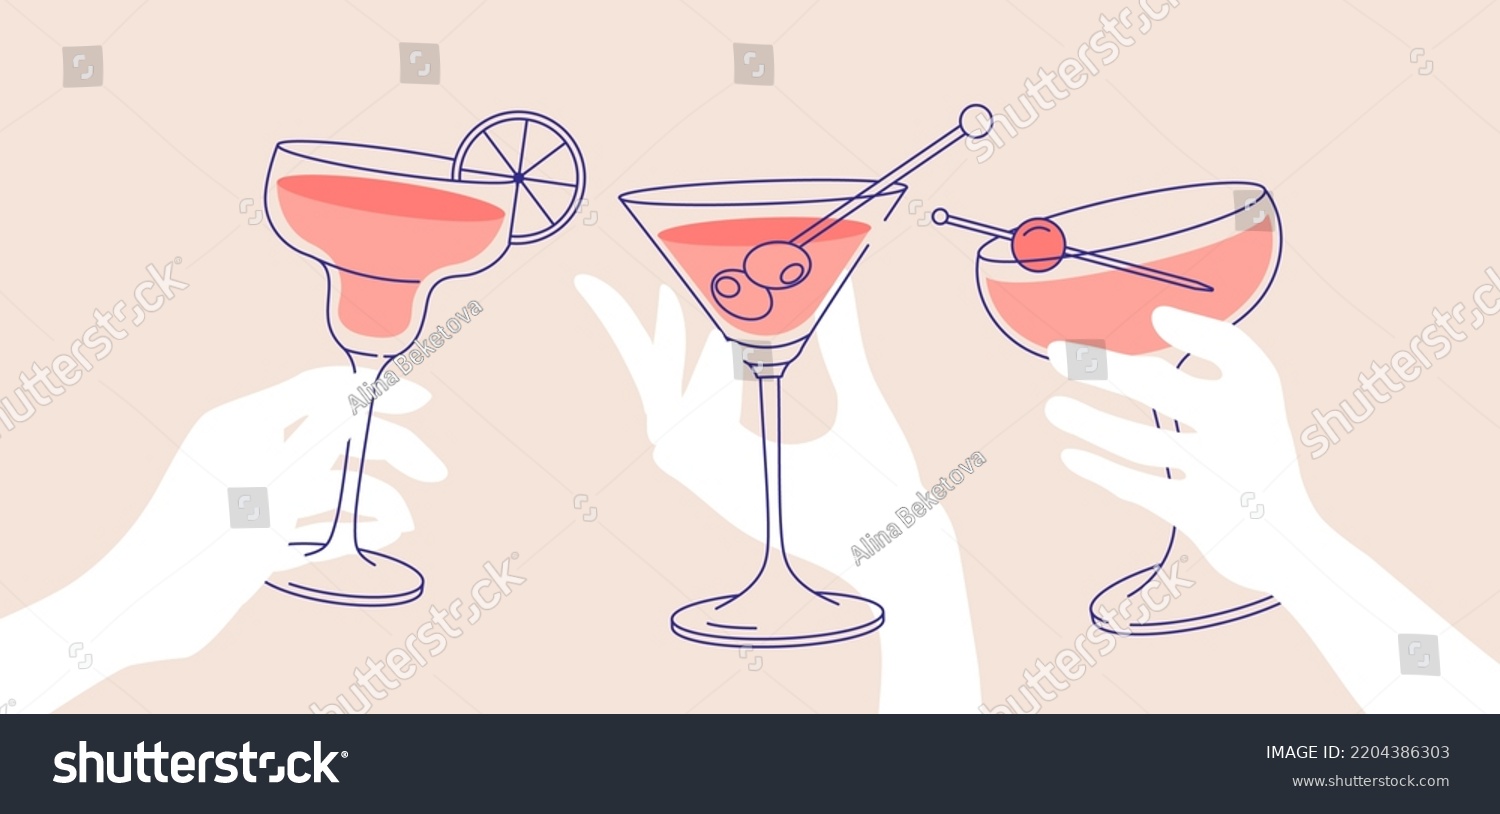 Outline drawing, cheers. Women’s hands holding glasses of margaritas and martini. Flat illustration for greeting cards, postcards, invitations, menu design. Line art template #2204386303